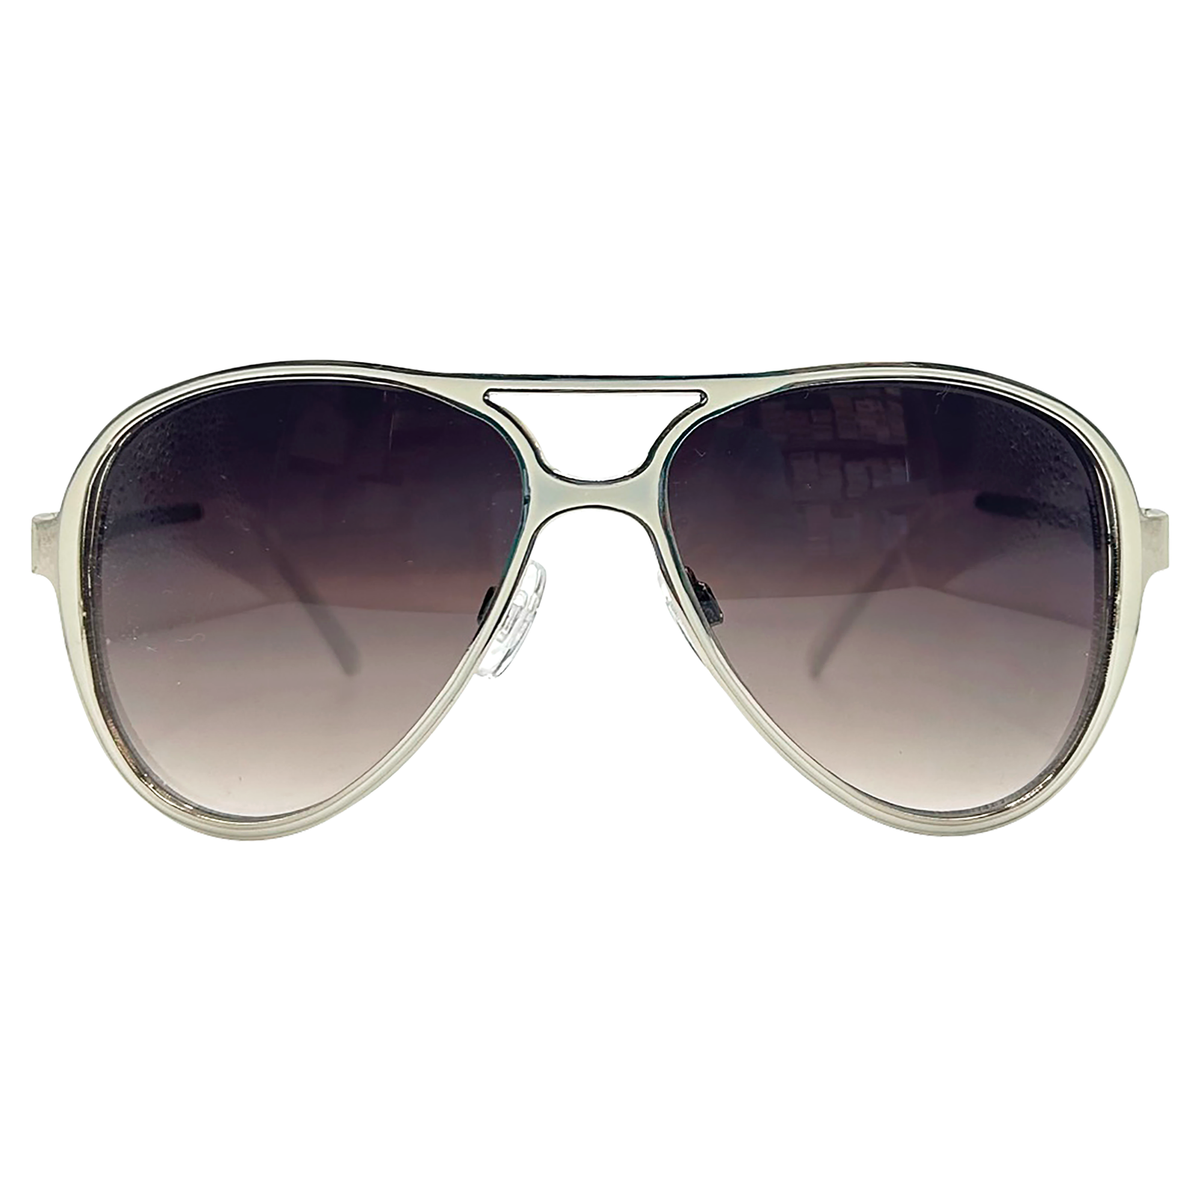 Shop Absolutely Aviator 70s Vintage Fashion Sunglasses Clear/Smoke